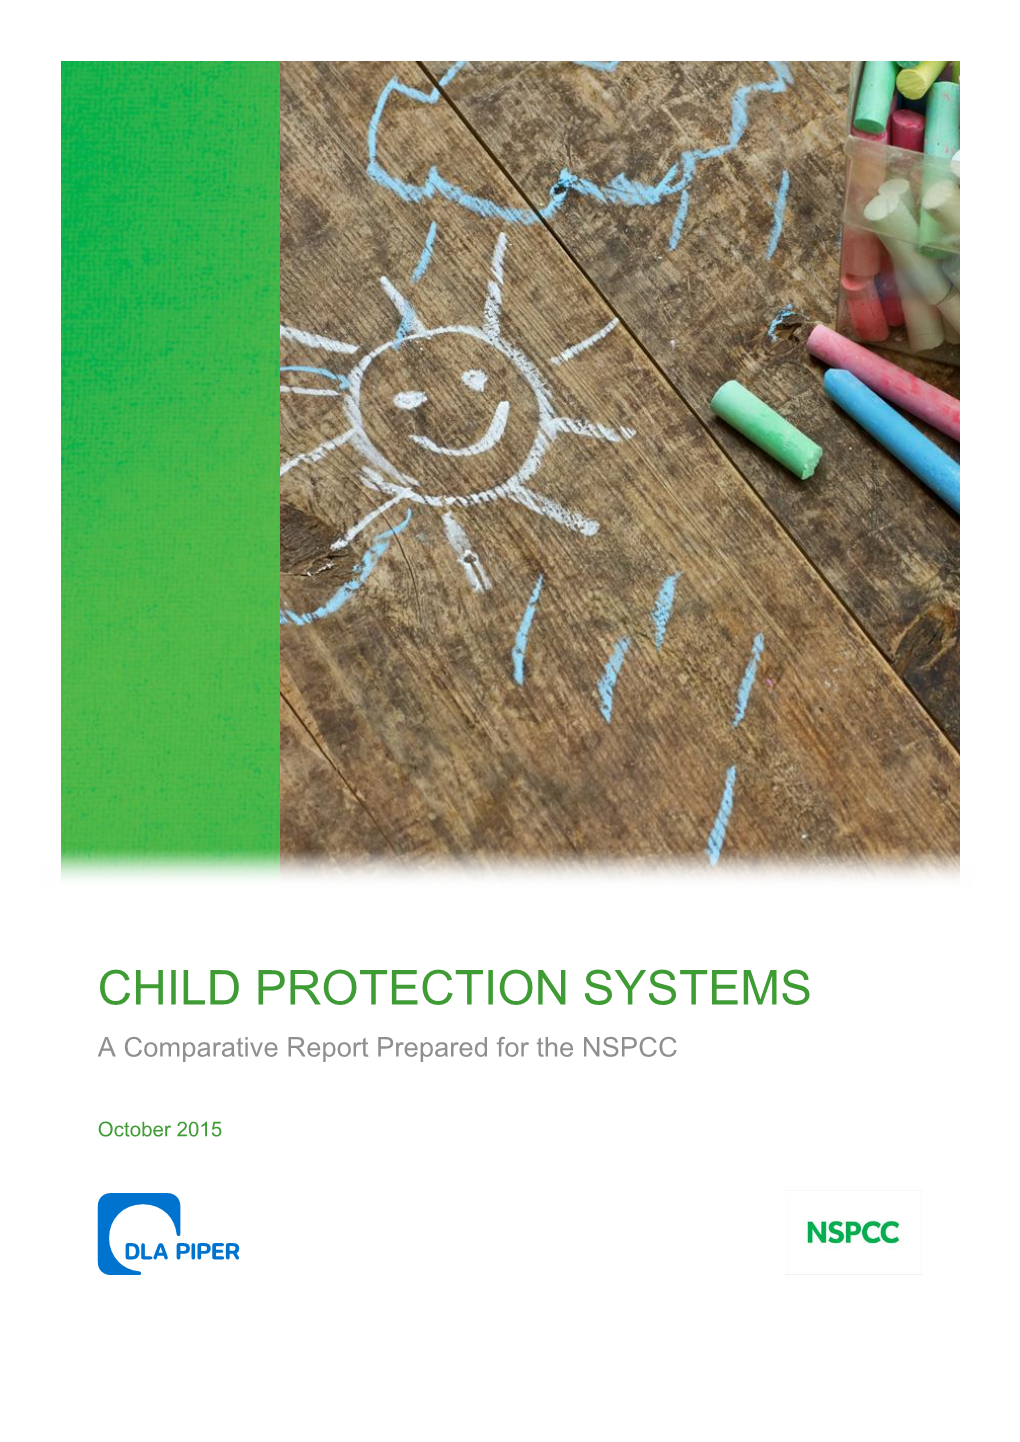 CHILD PROTECTION SYSTEMS a Comparative Report Prepared for the NSPCC